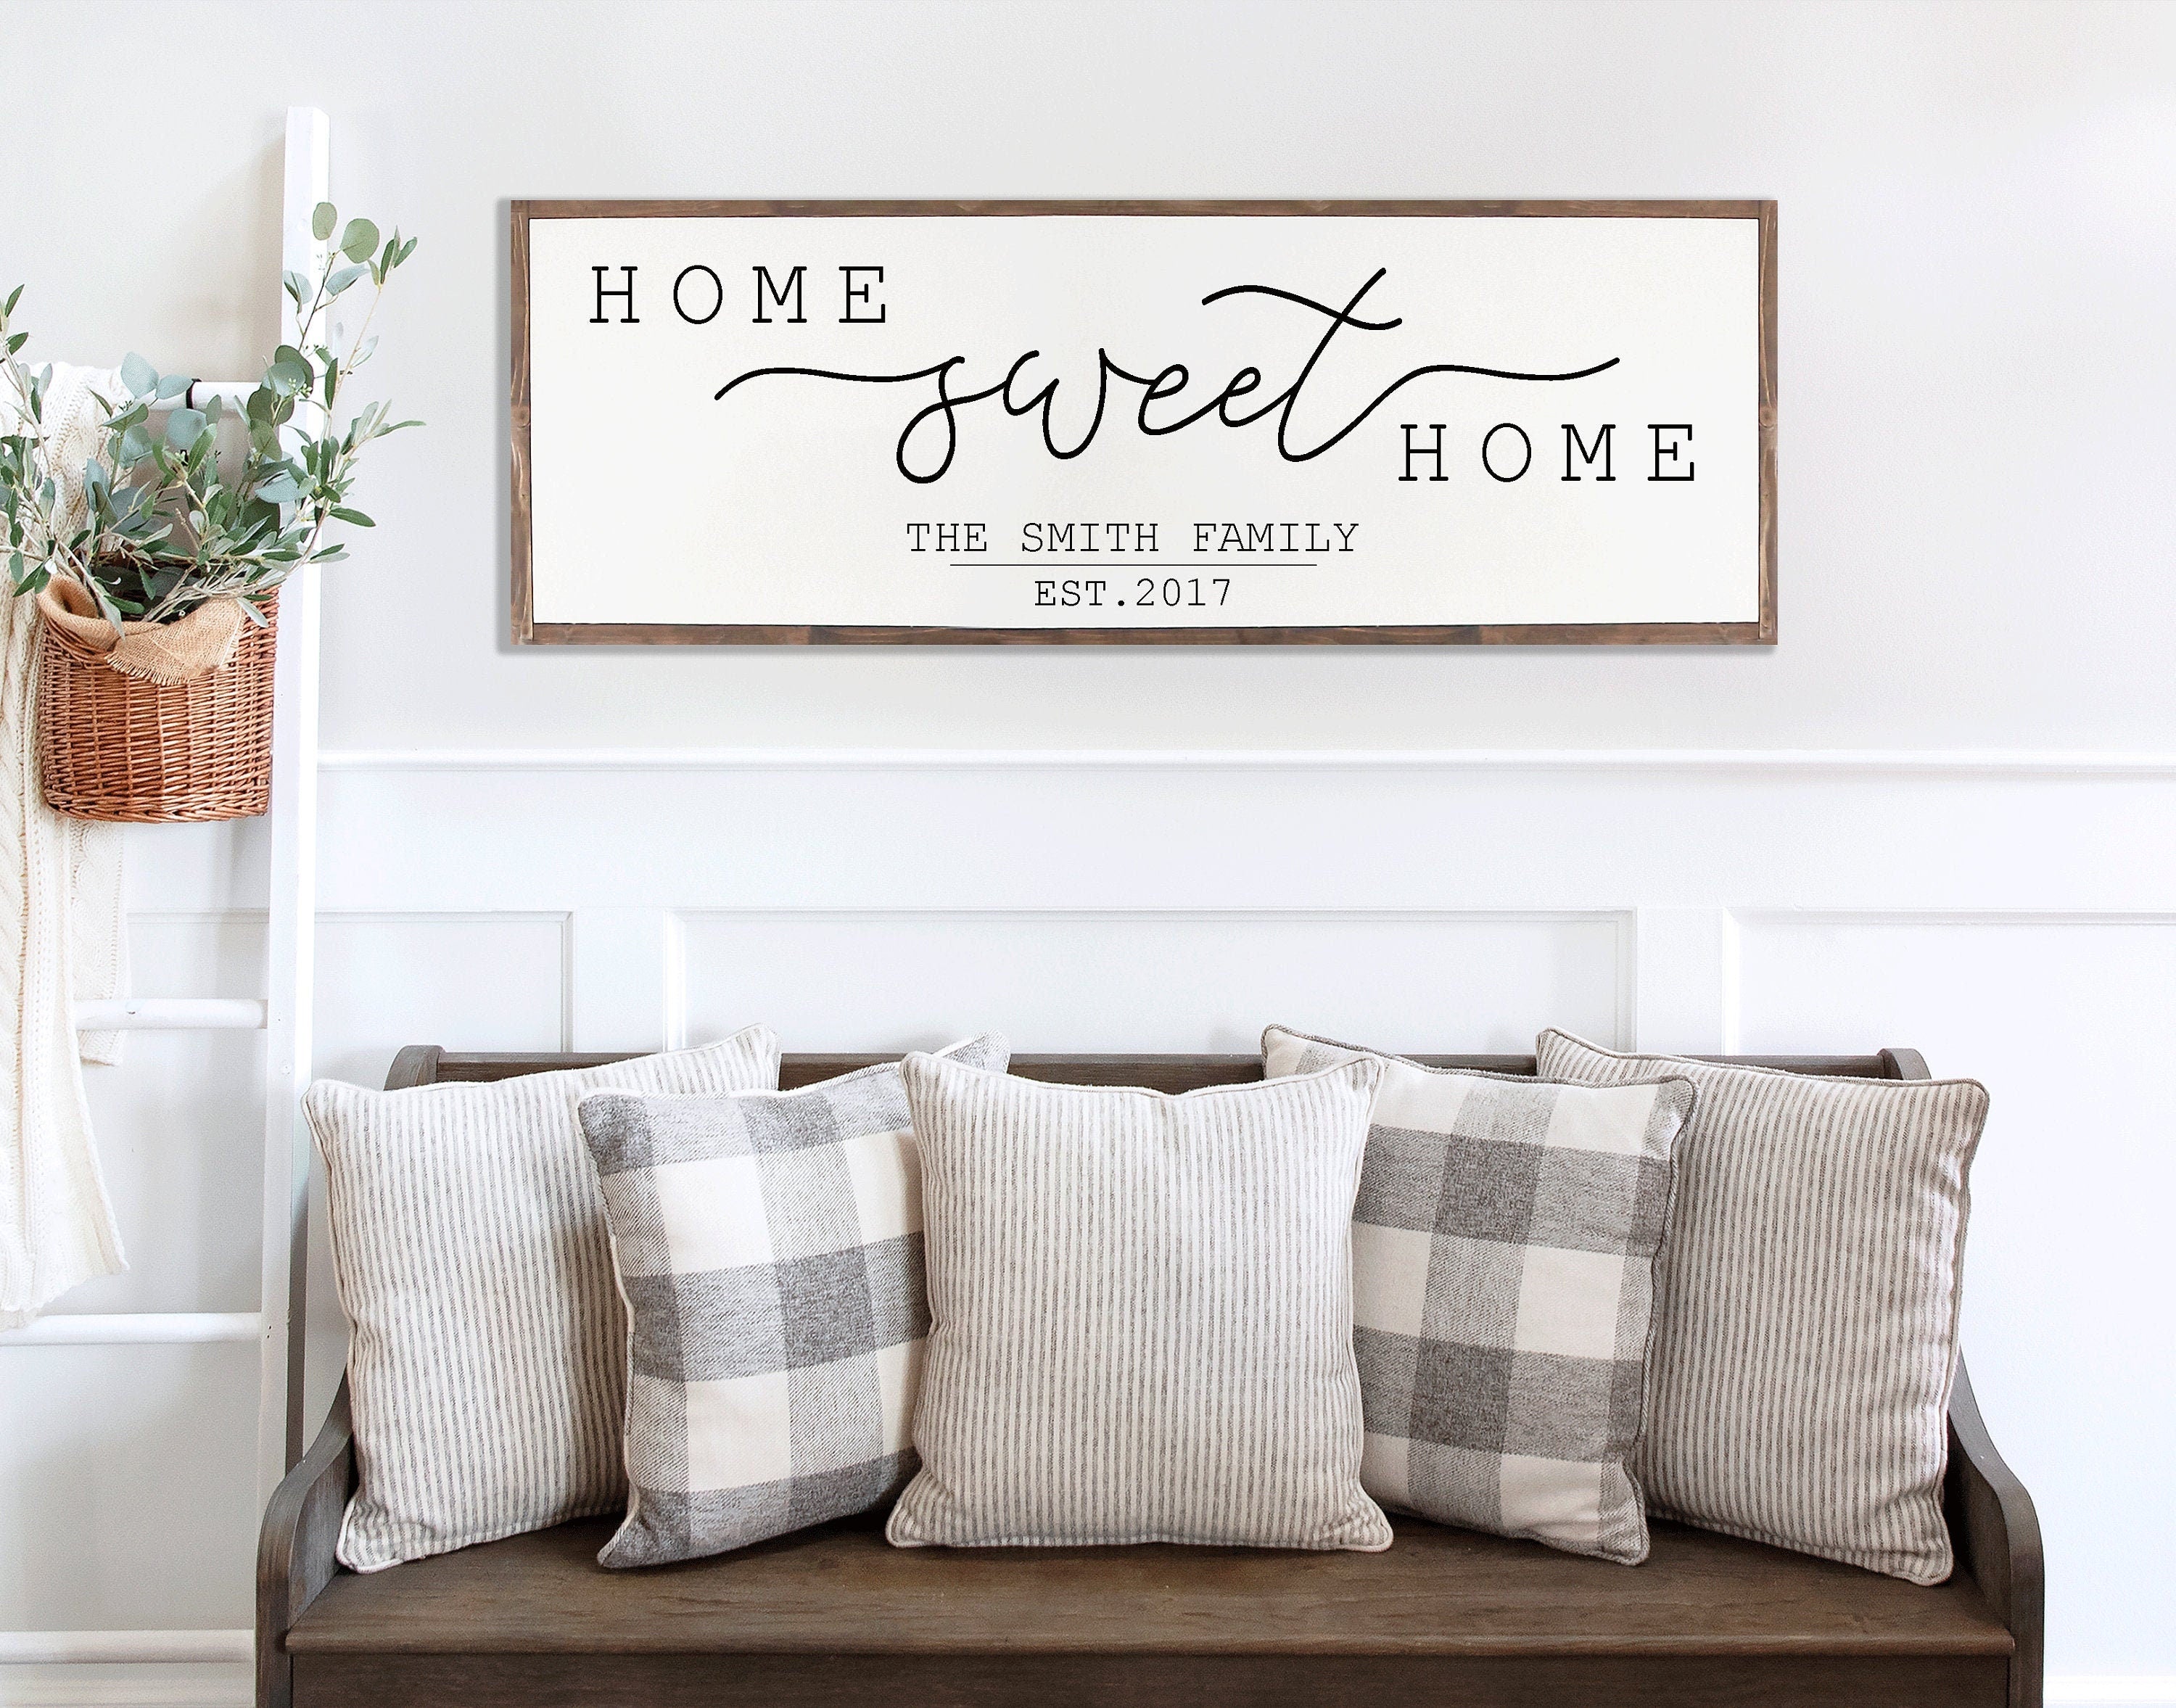 26 Home Sweet Home ideas  old dominion, sweet home, old dominion